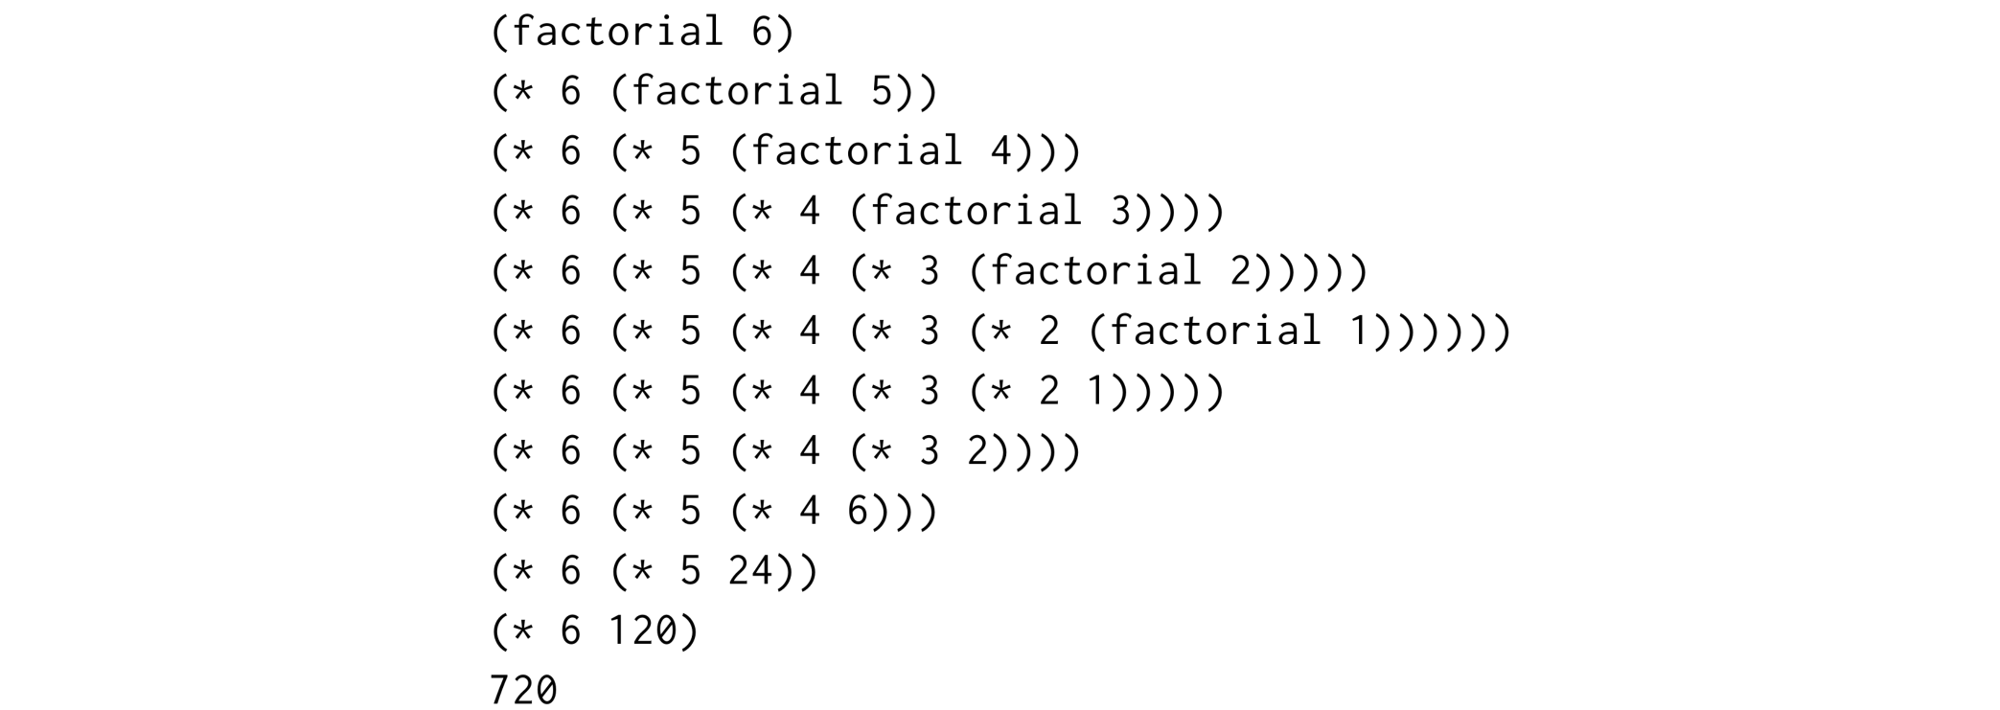 Factorial of 6 is decomposed into 6 times factorial of 5, which is decomposed into 5 times factorial of 4, and so on...